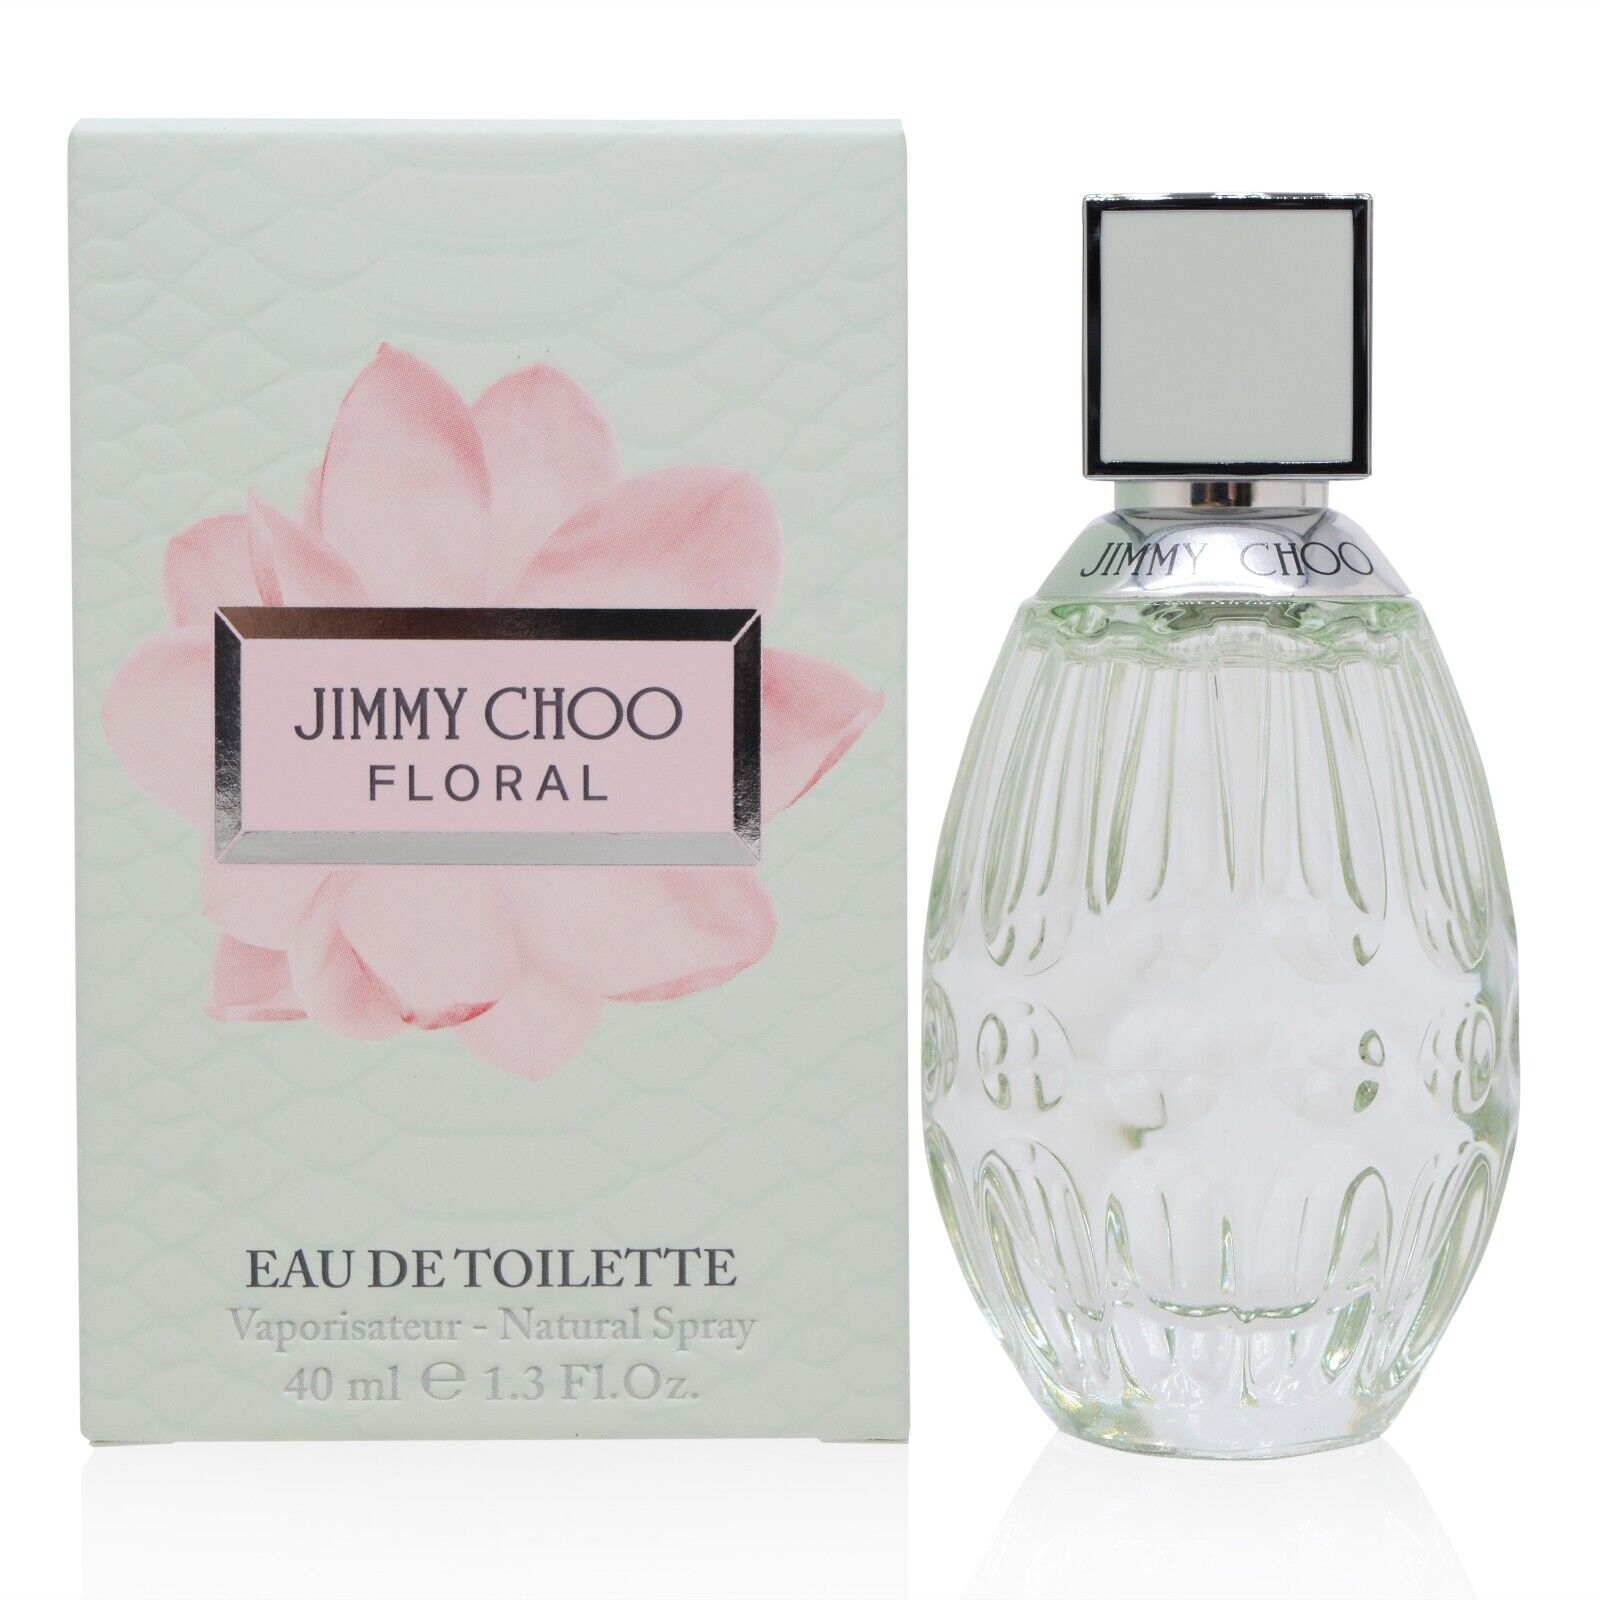 Floral By Jimmy Choo EDT 1.3FL